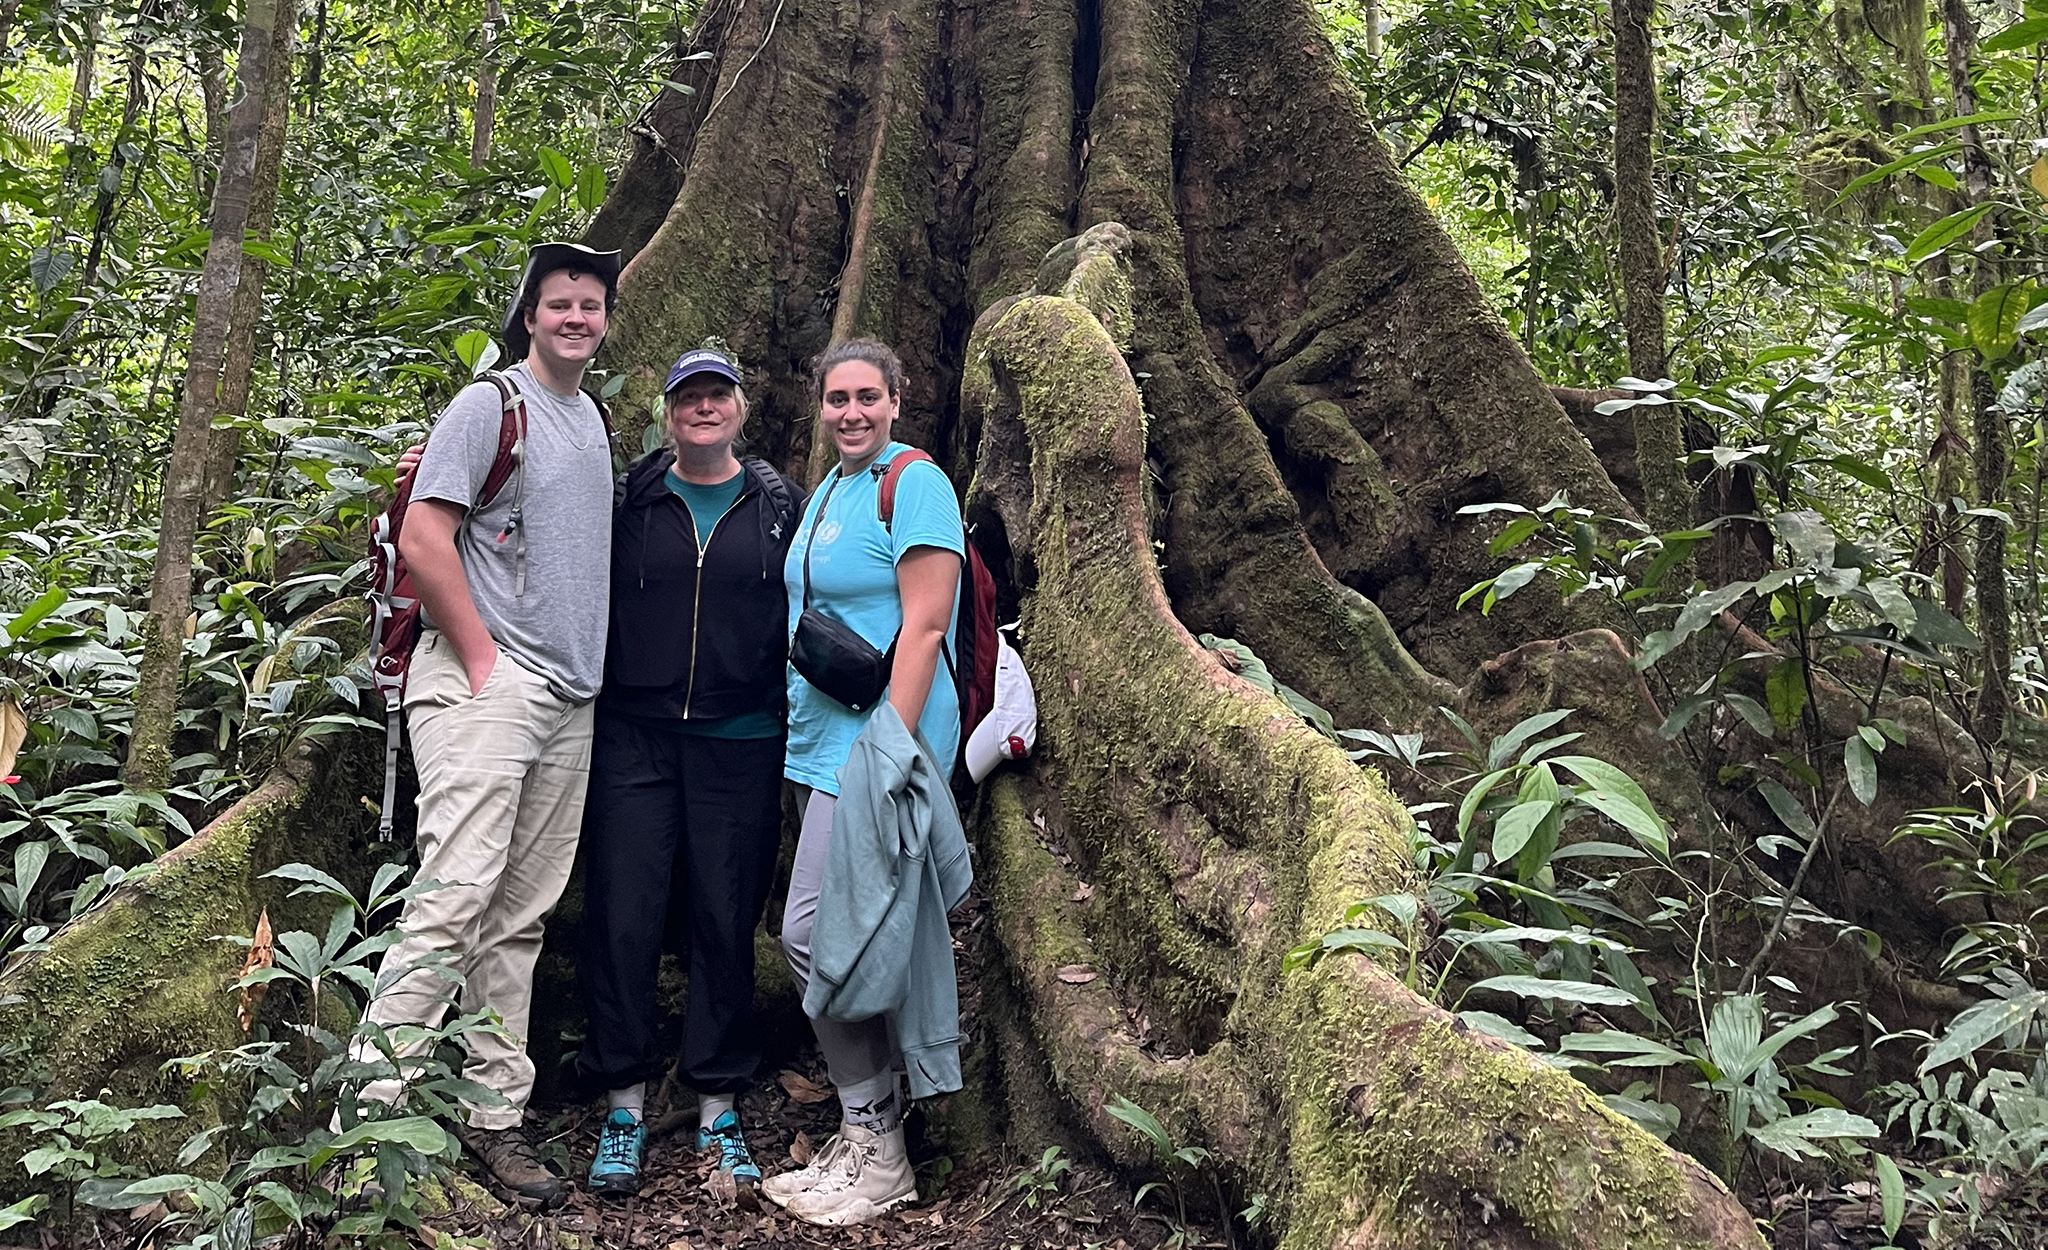 Kate Centellas (center), Croft associate professor of anthropology and international studies, spends time in the jungle with two Ole Miss students on a recent trip to Bolivia. Centellas will lead a group of 10 students to La Paz, Bolivia, next summer to study medical anthropology and health disparities as part of a Fulbright-Hays Group Projects Abroad Award. Submitted photo